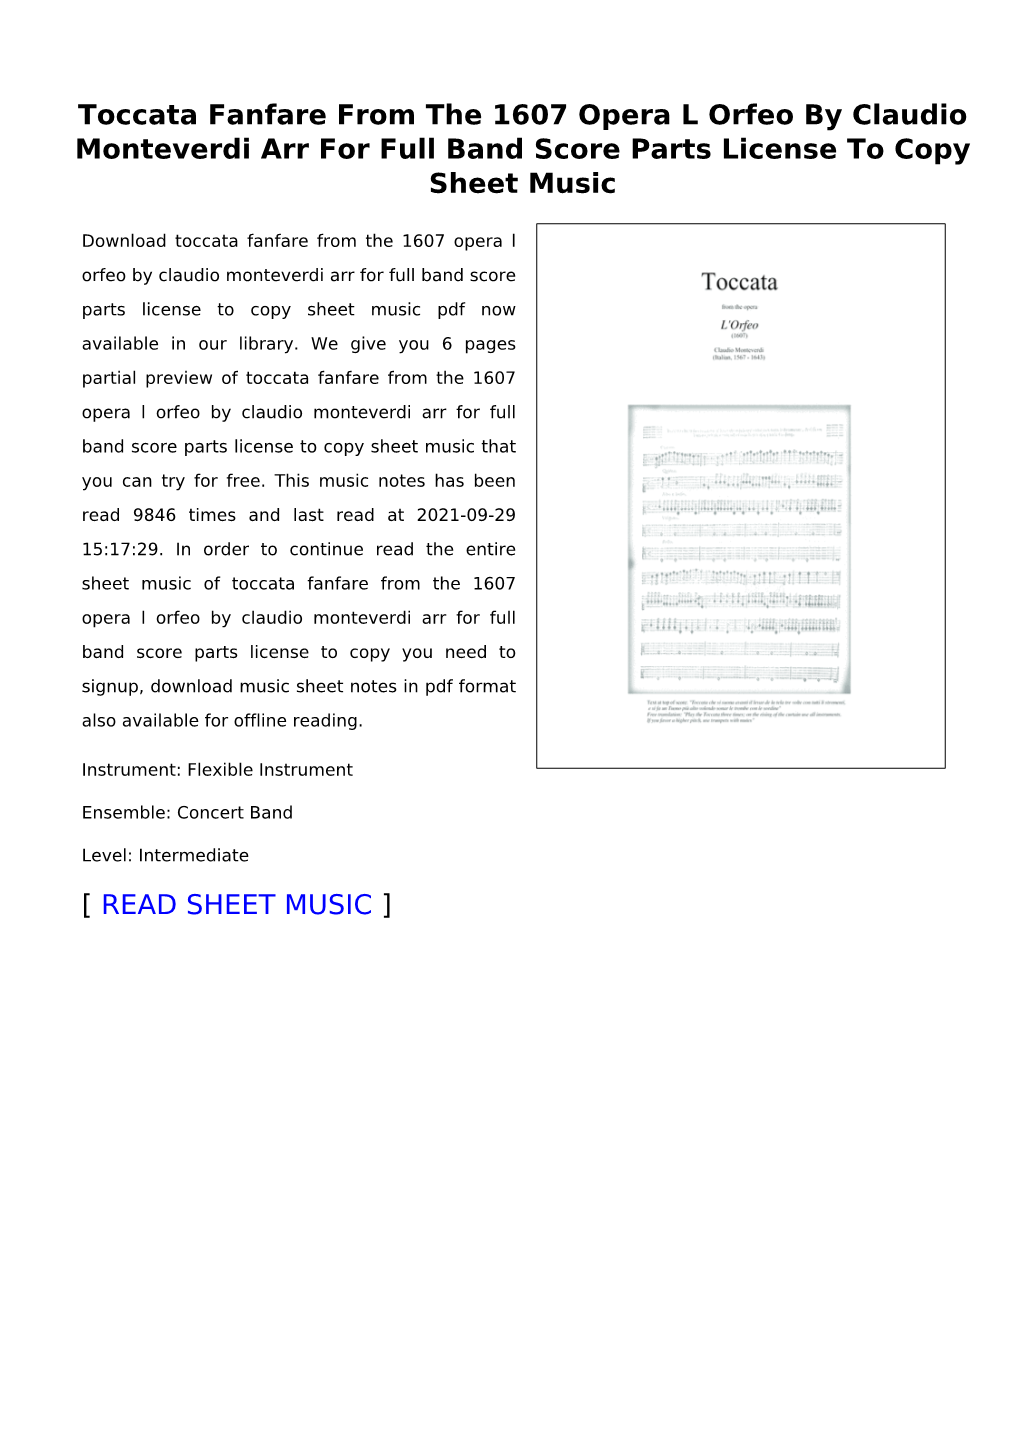 Toccata Fanfare from the 1607 Opera L Orfeo by Claudio Monteverdi Arr for Full Band Score Parts License to Copy Sheet Music